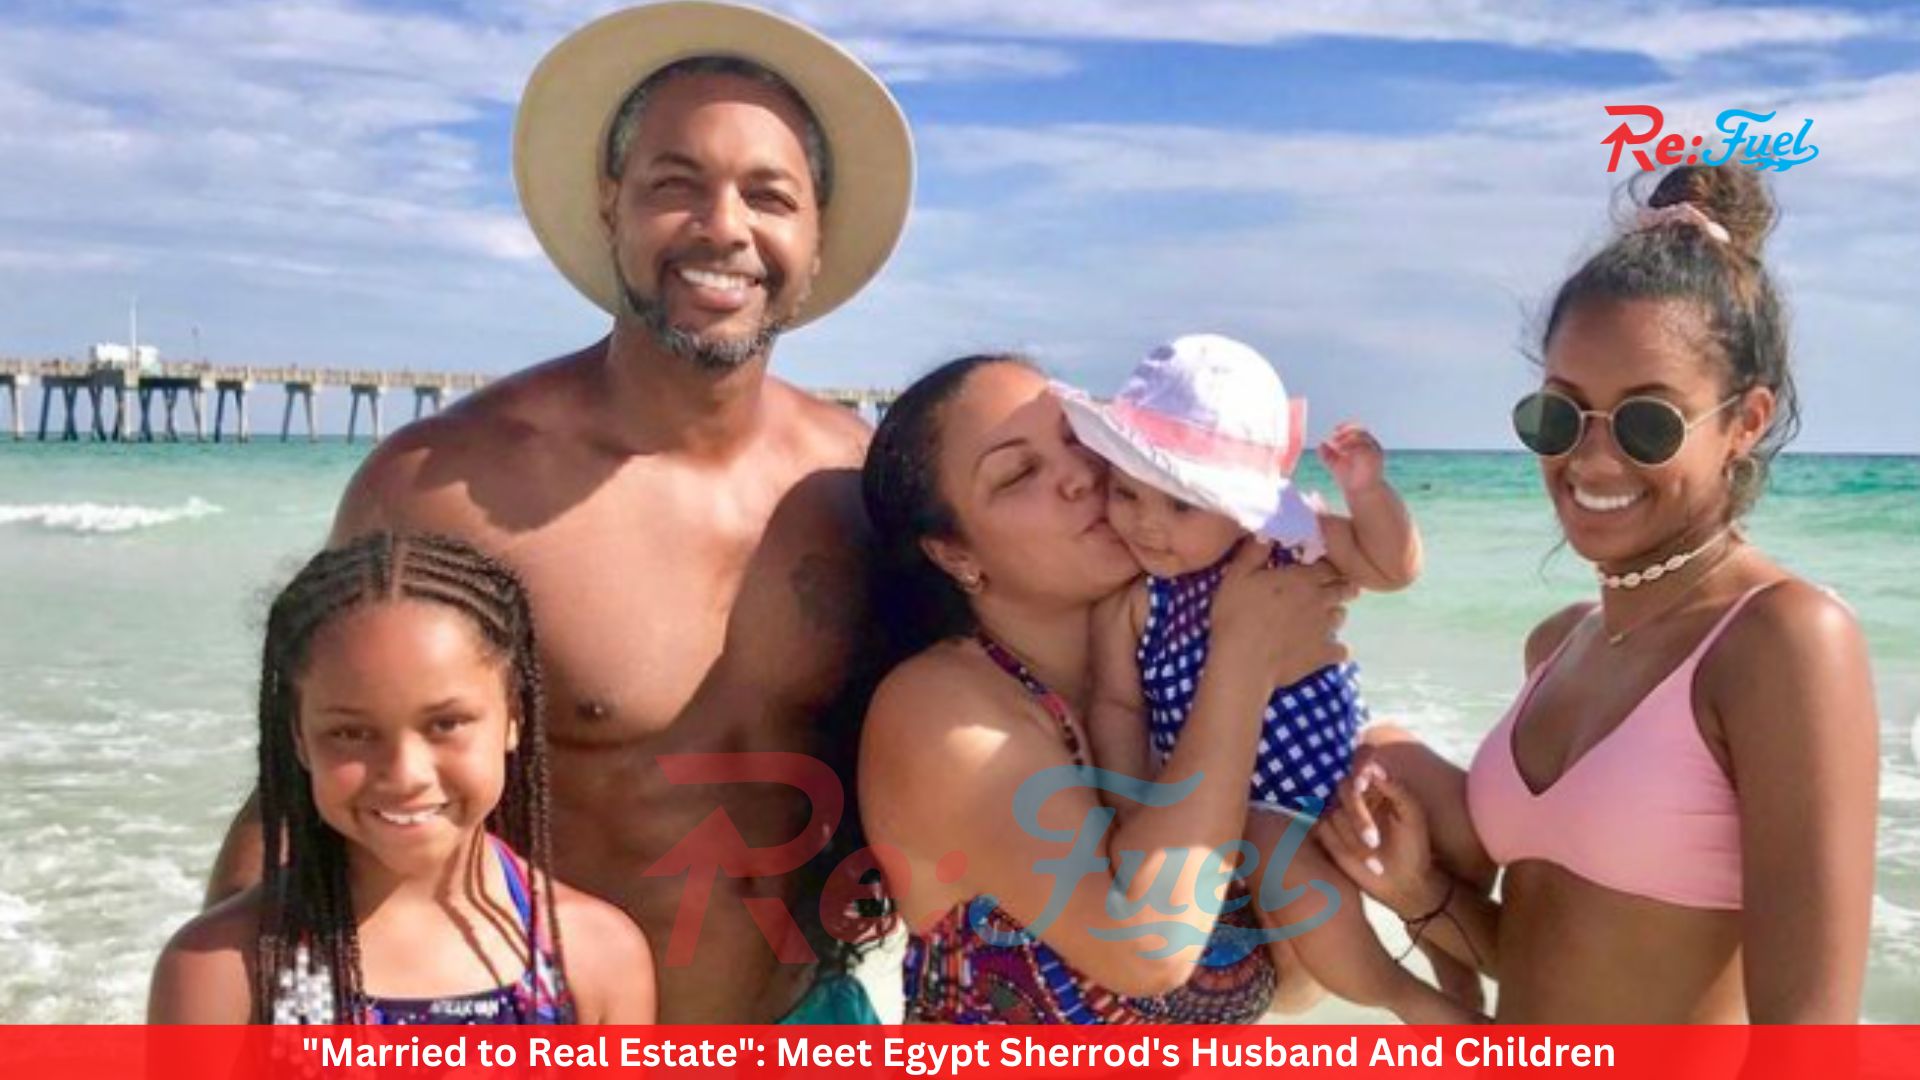 "Married to Real Estate": Meet Egypt Sherrod's Husband And Children